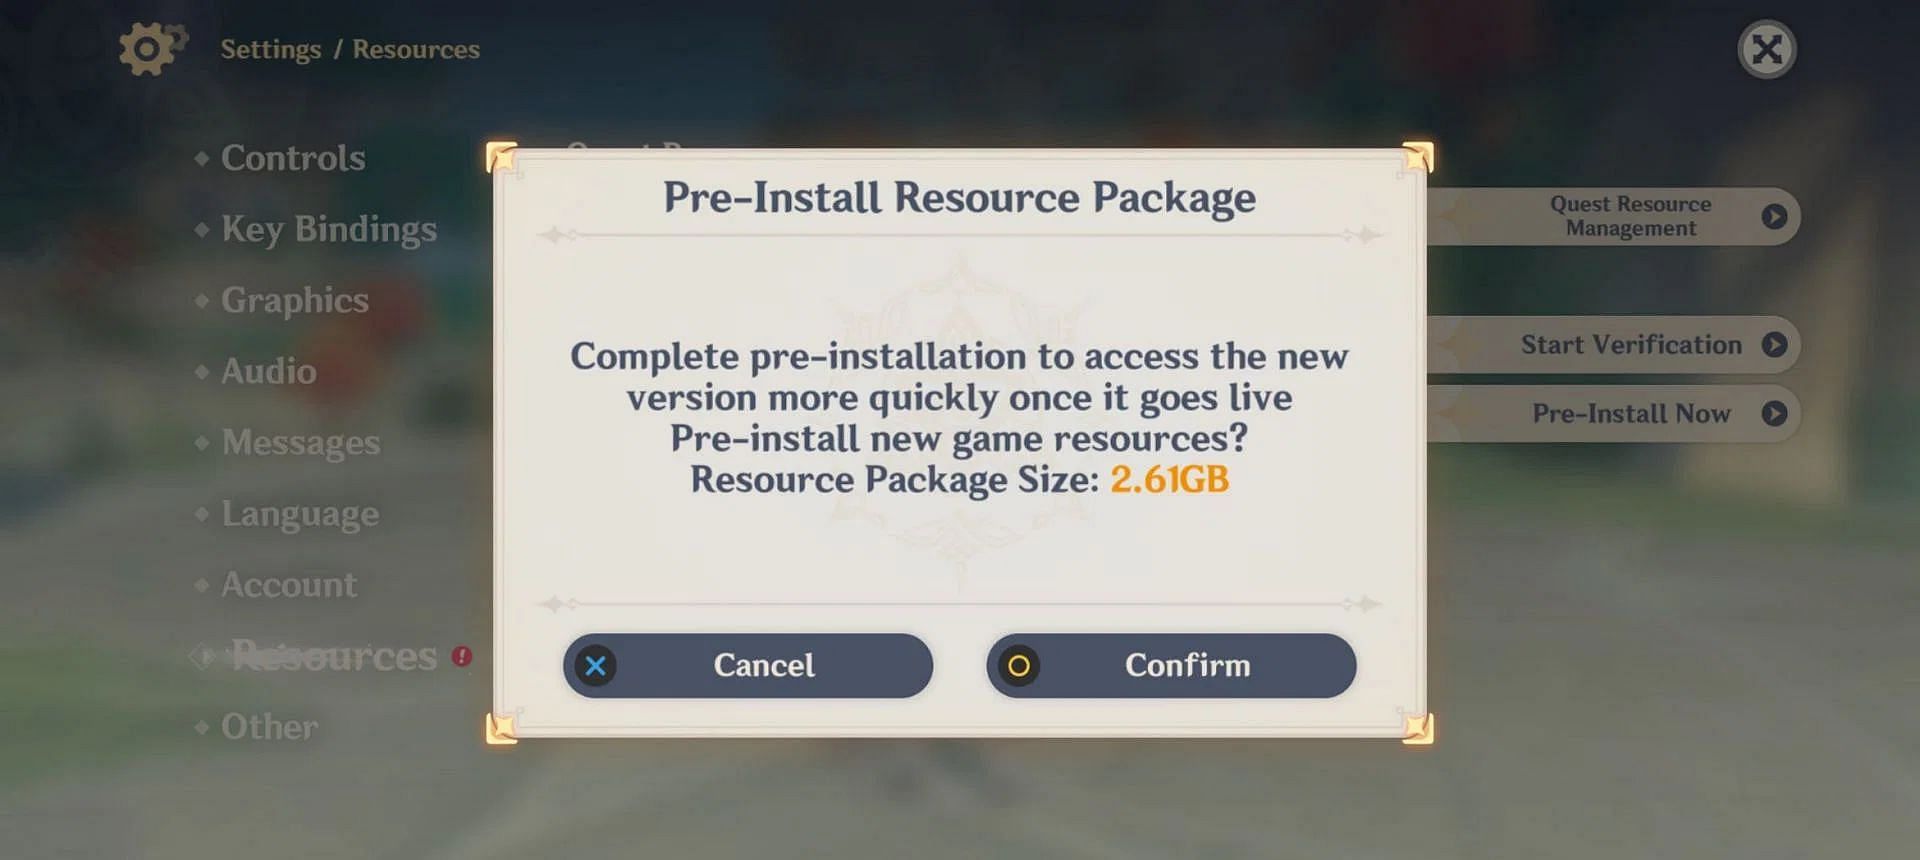 Confirm Pre-Installation Resource Packages (Image via HoYoverse)